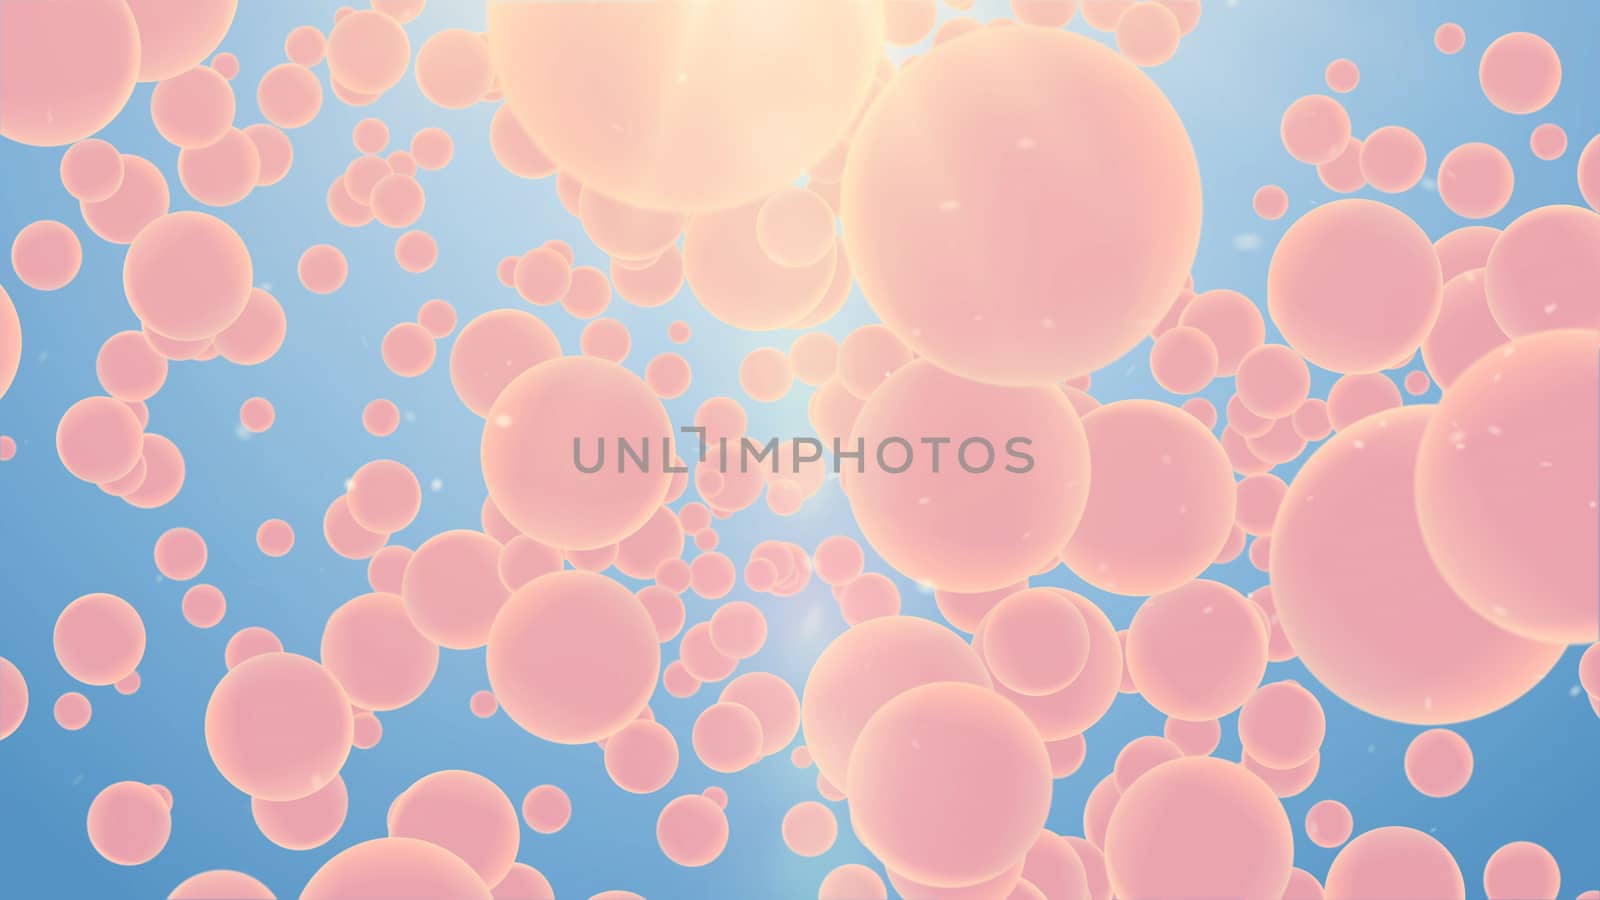 Artistic  3d illustration of abstract, pink and different size spheres hanging and turning around in the air in the light blue background. The picture  looks hilarious and childish